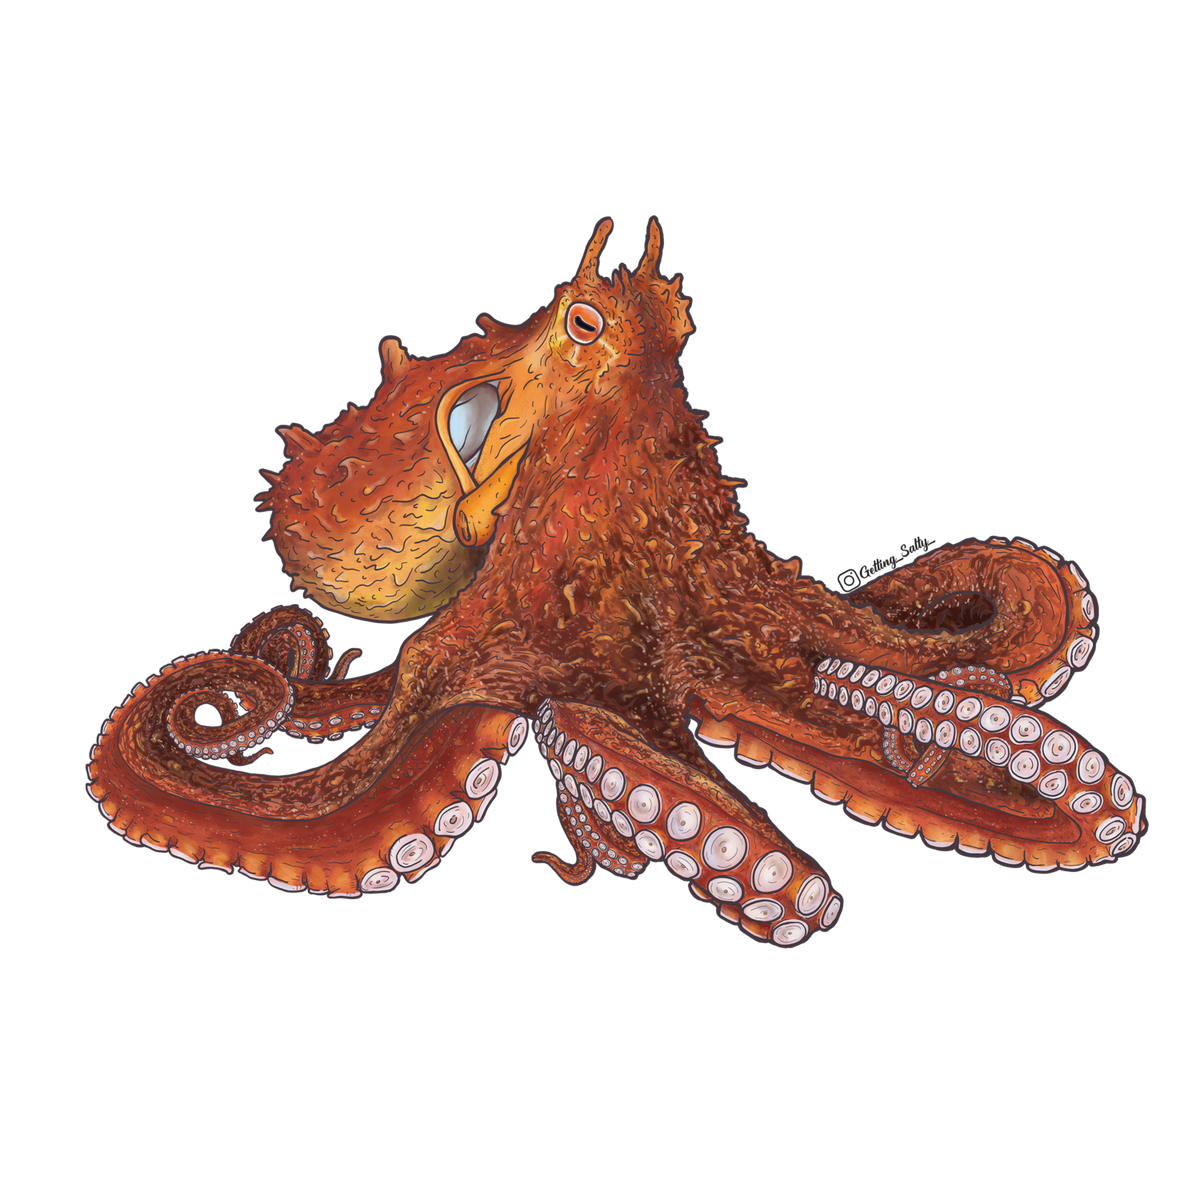 Getting Salty Giant Pacific Octopus | Diving Sports Canada